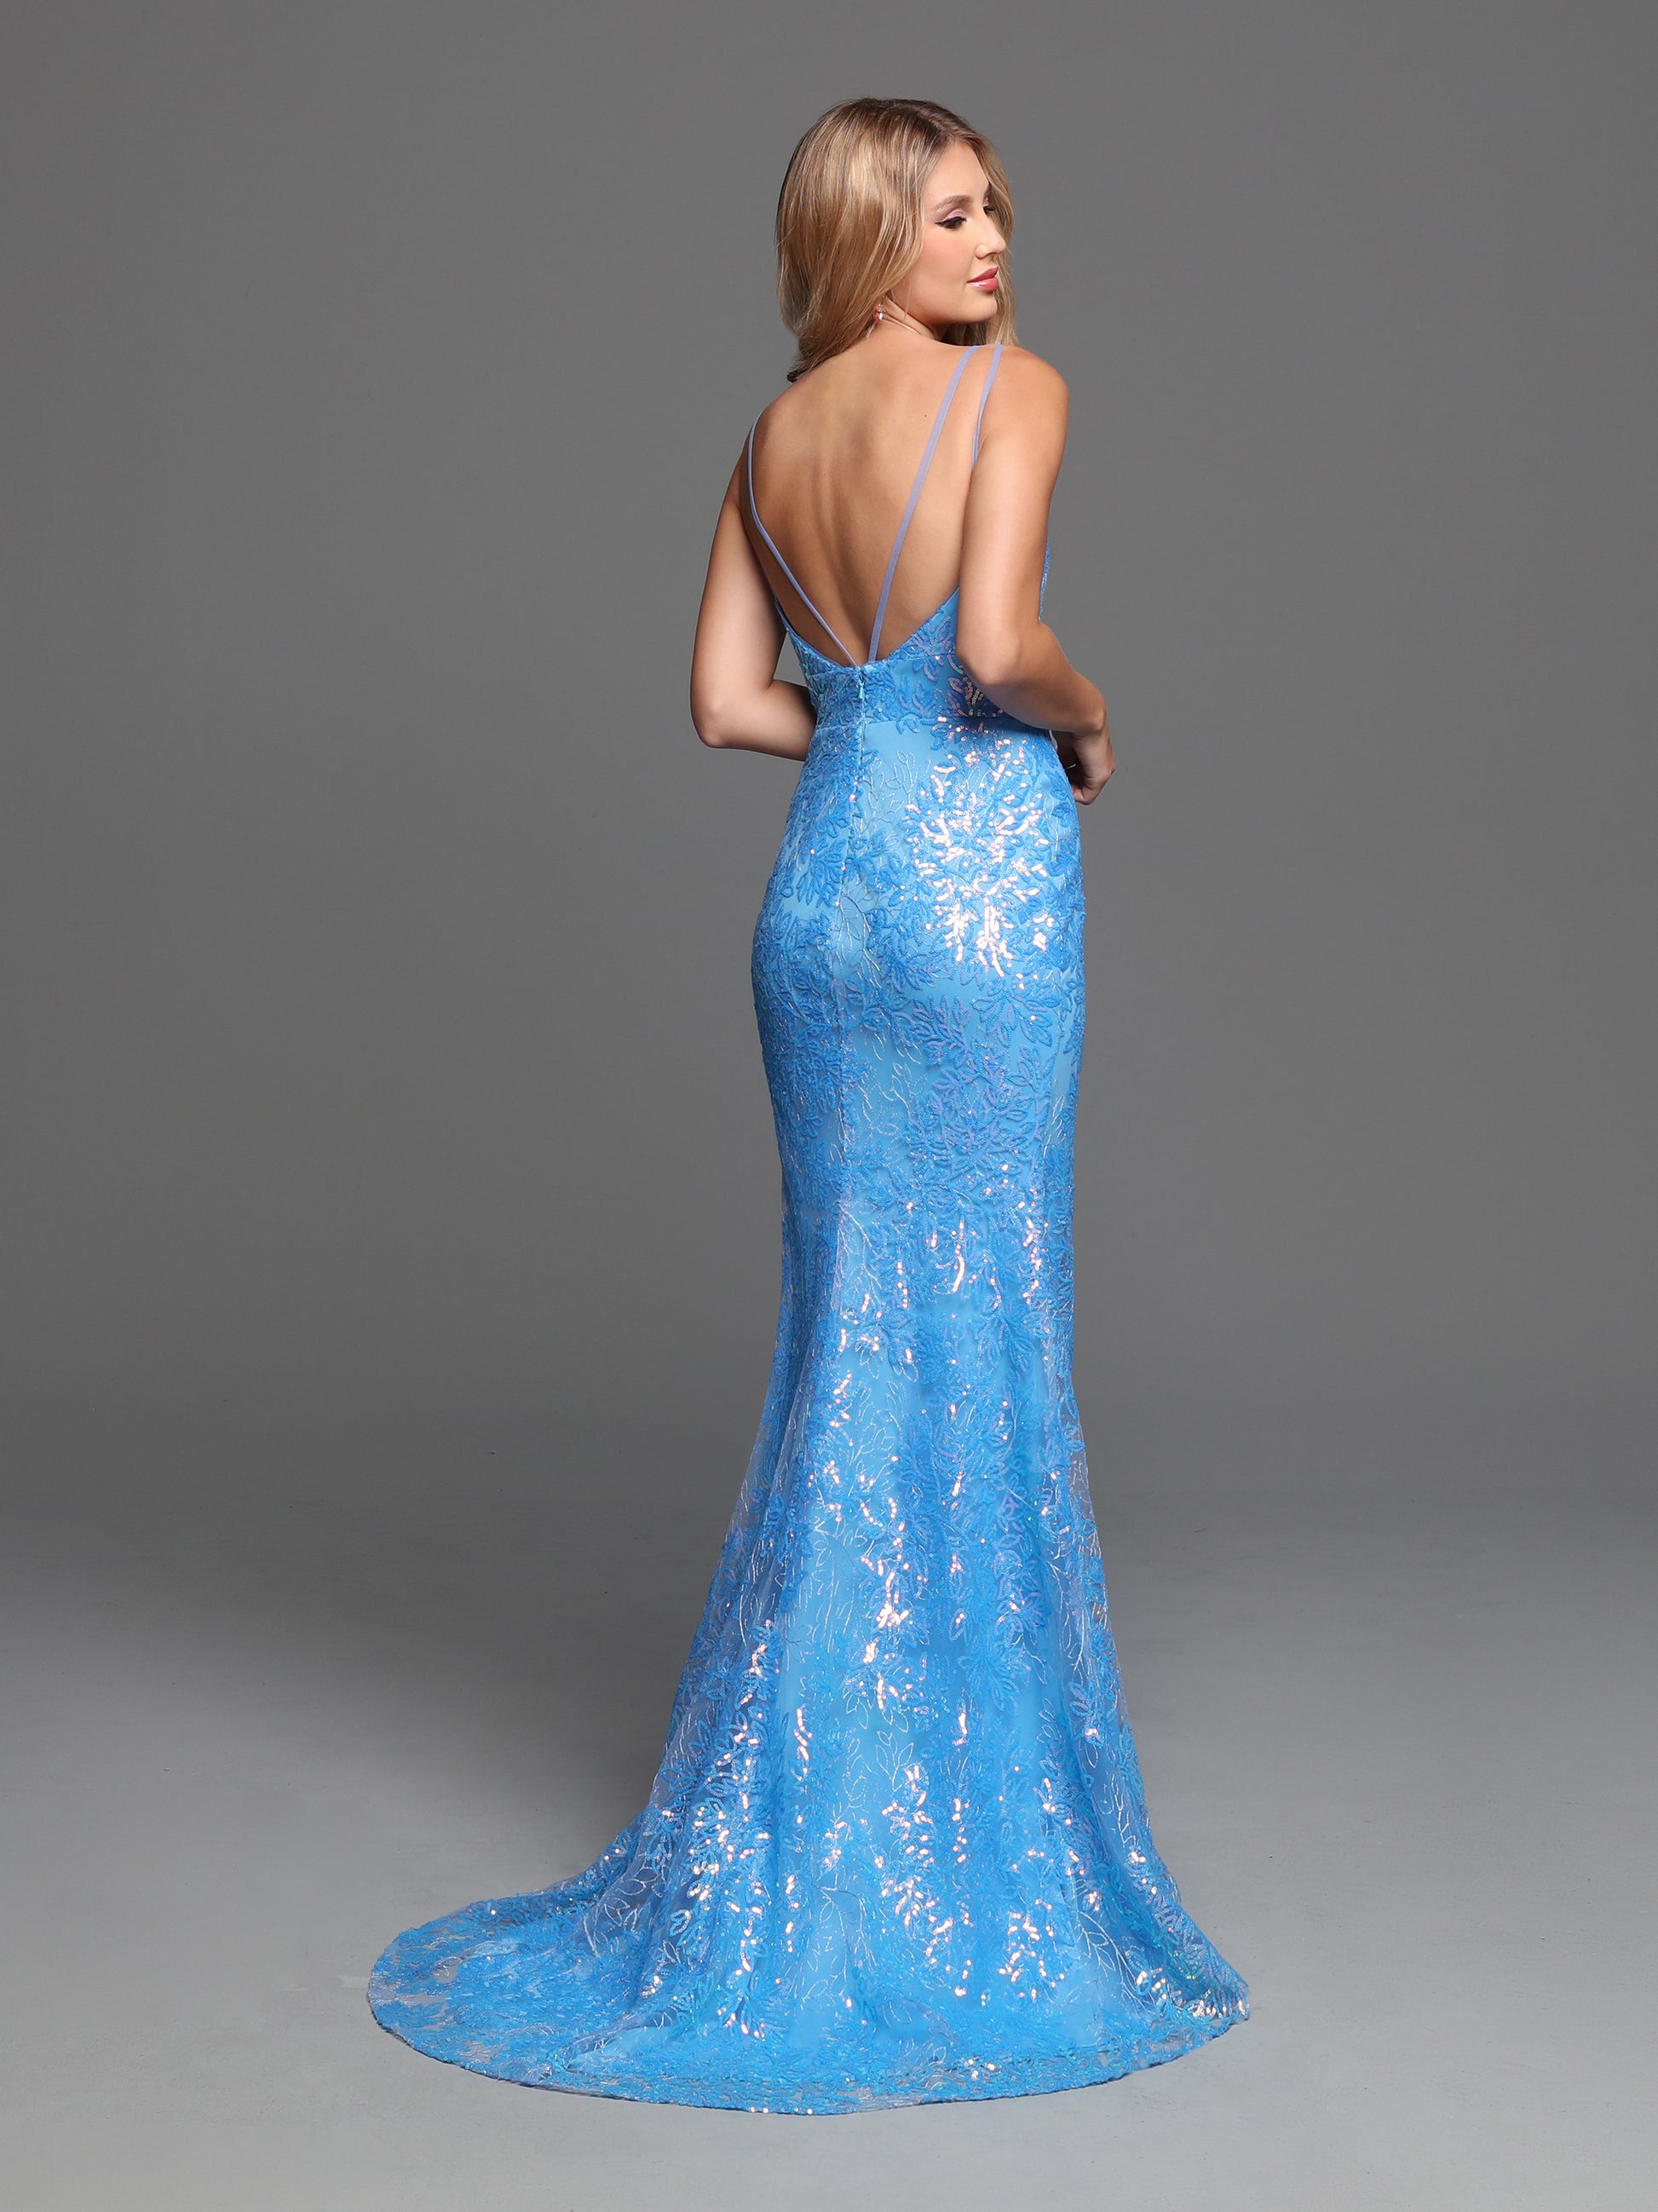 Sparkle Prom 72259 Long Fitted Sequin V Neck Prom Dress Slit Pageant Gown Embellished   Sizes: 0-20  Colors: Turquoise